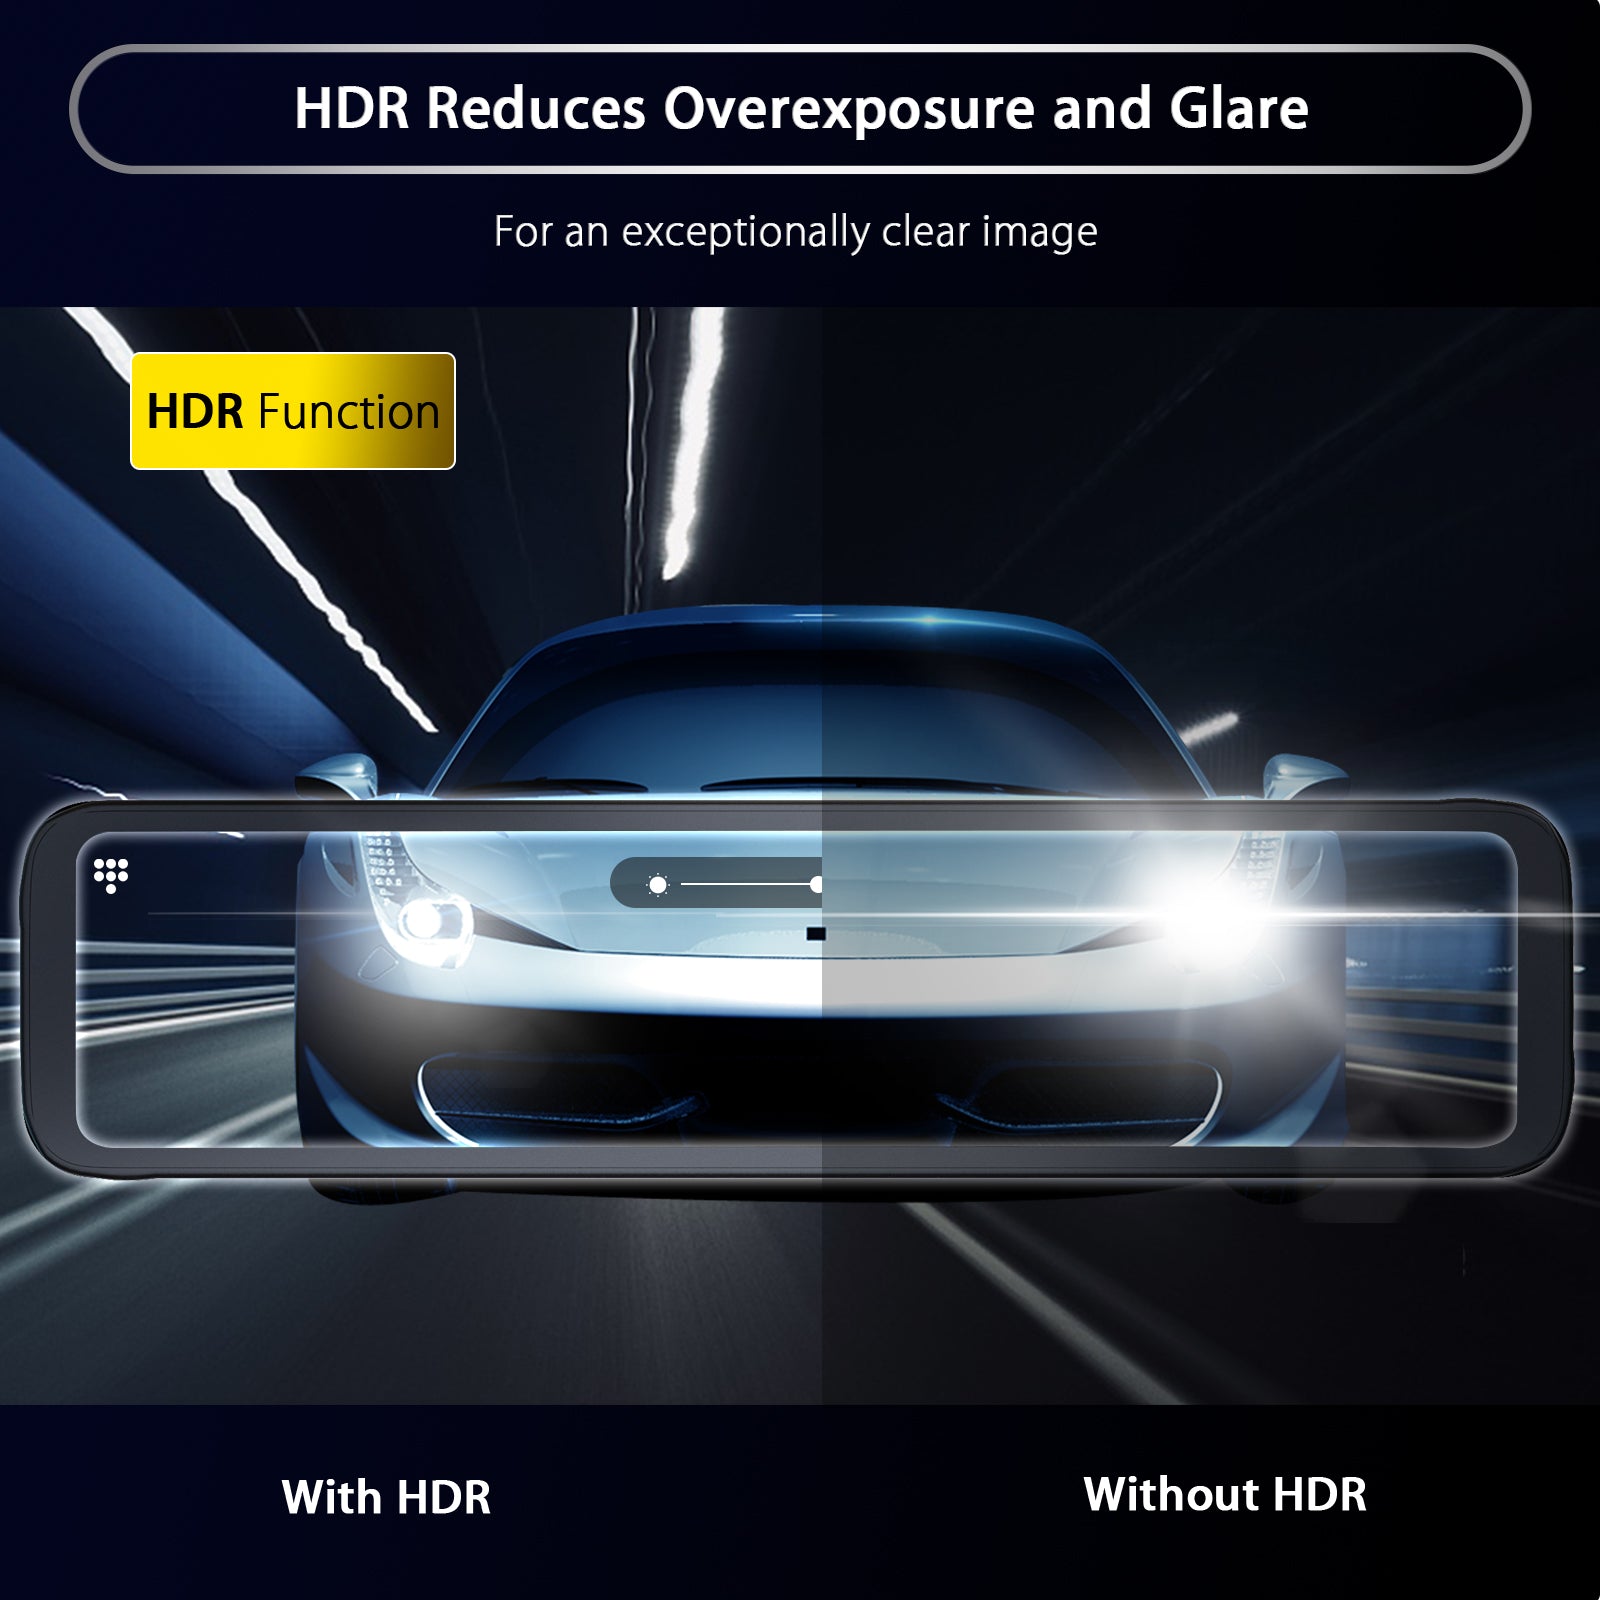 HDR-enabled camera prevents overexposure and glare, resulting in clear images. 